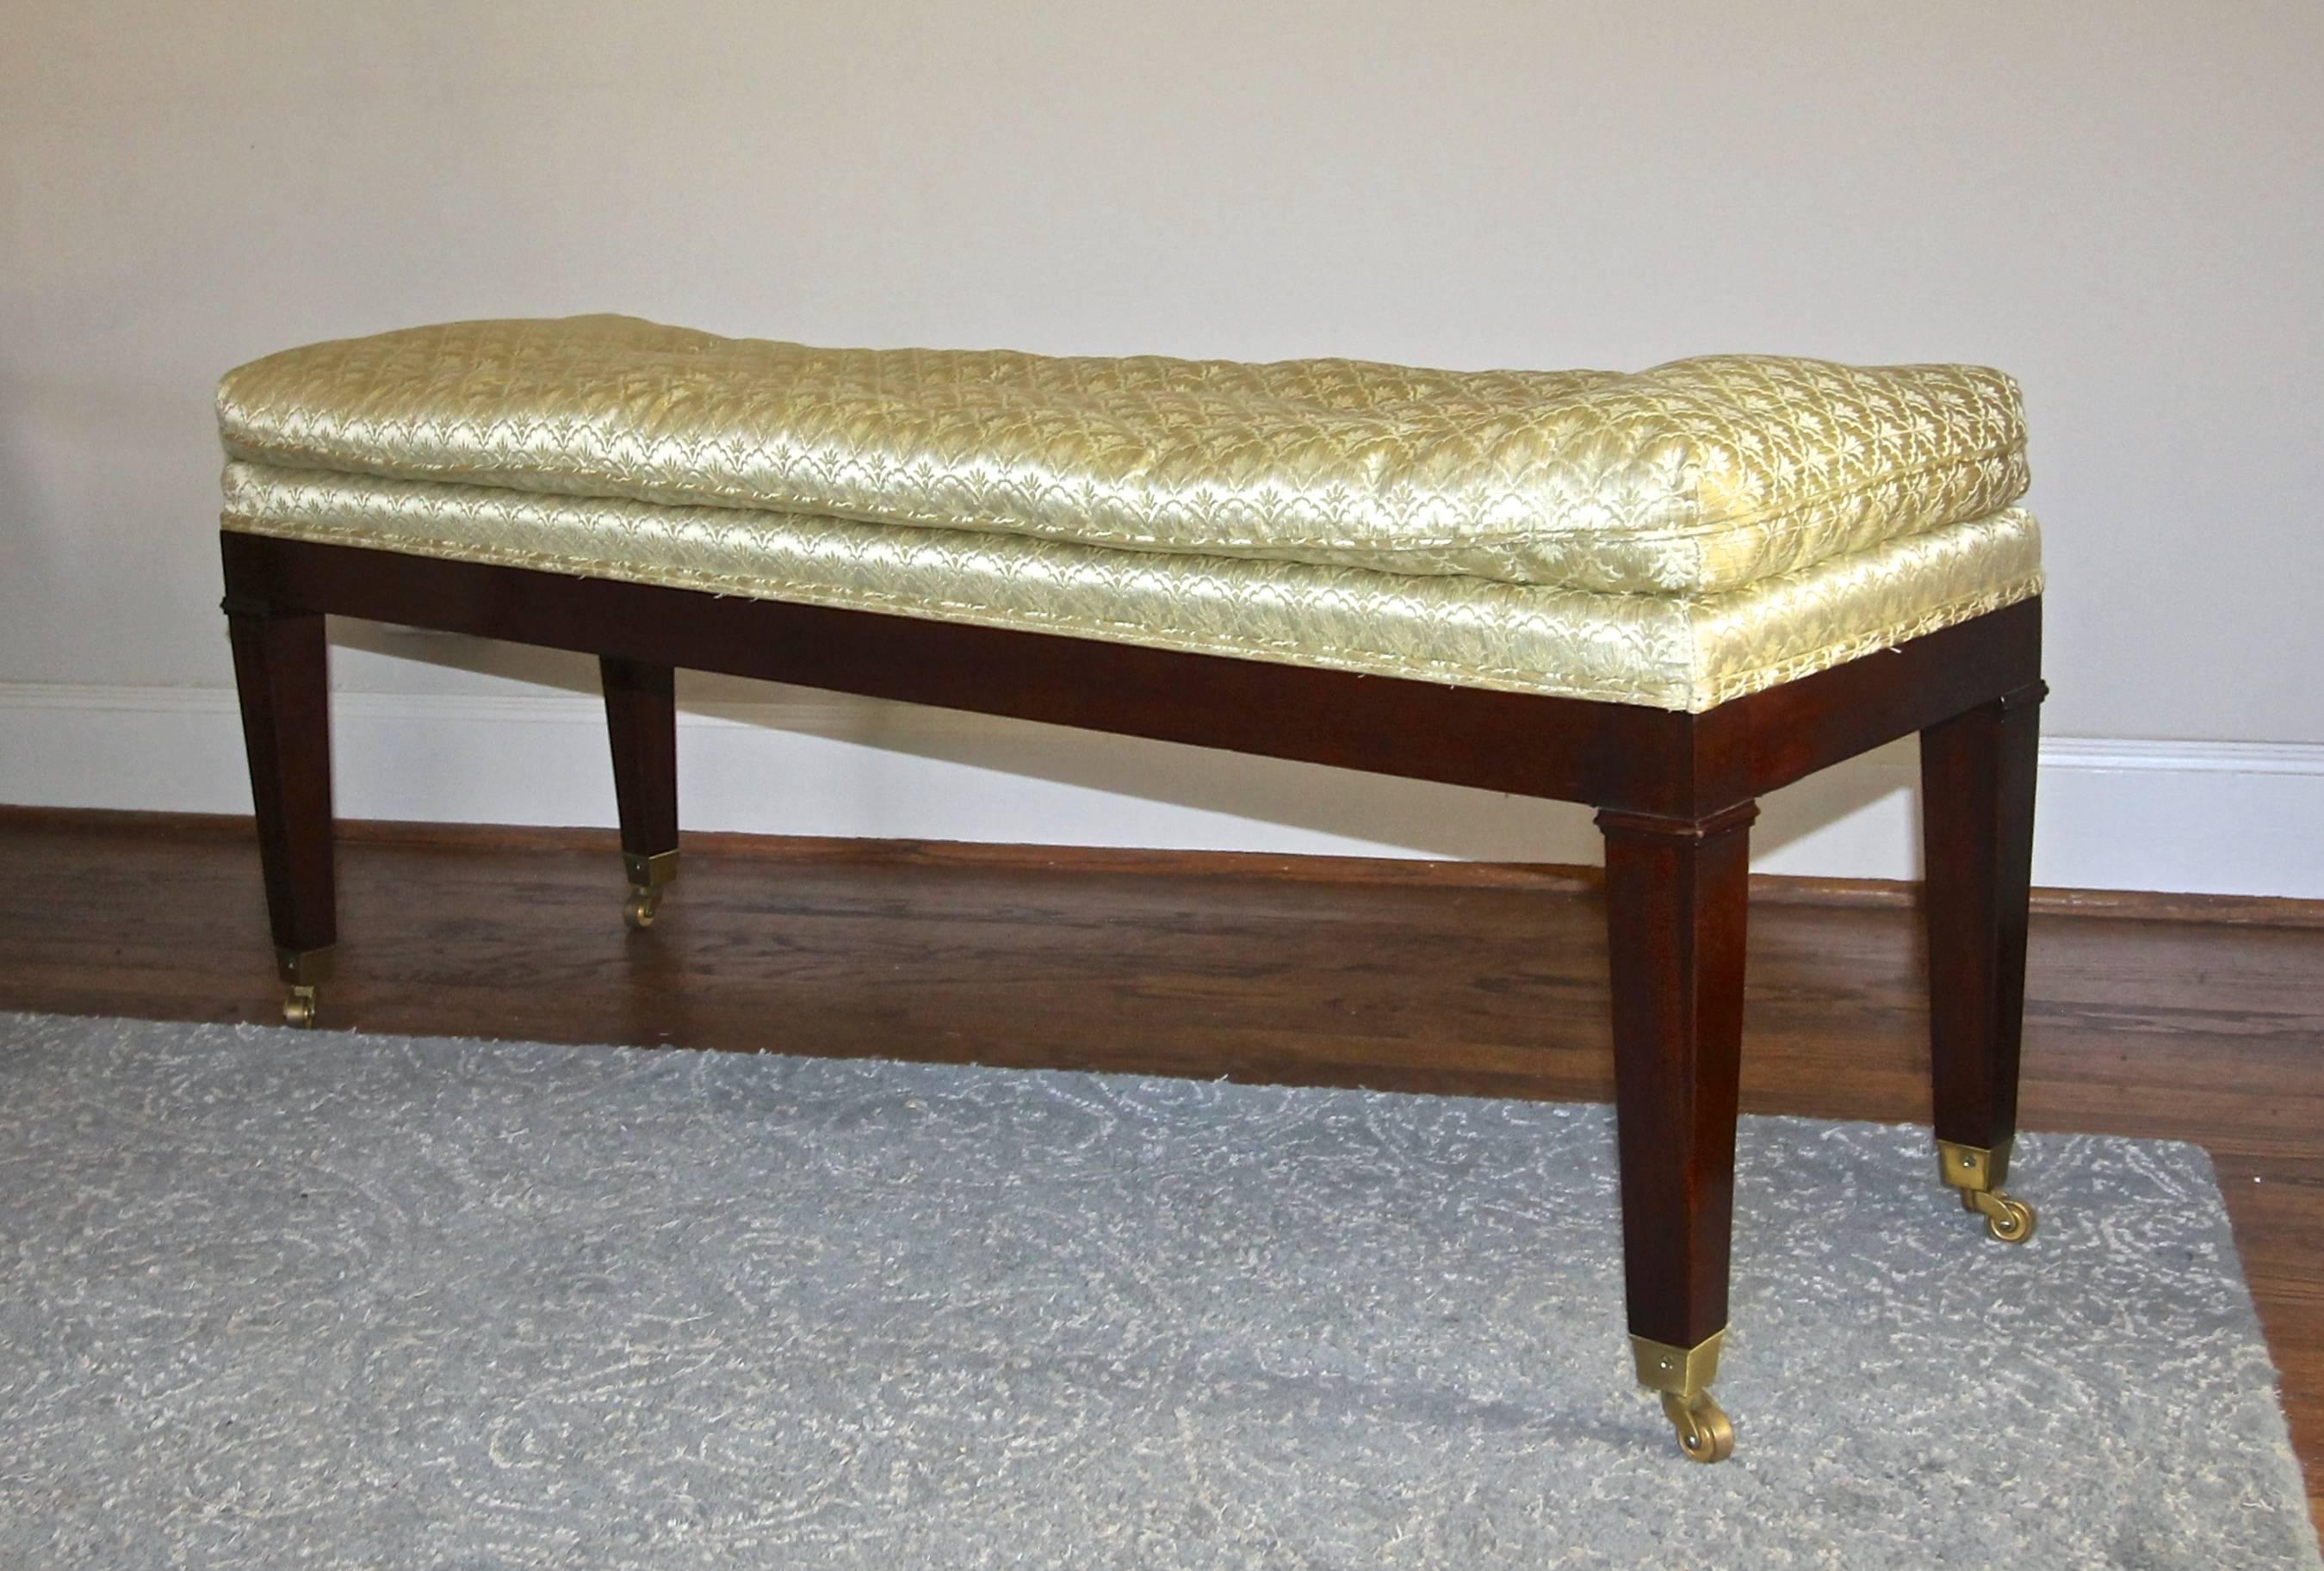 Upholstered Mahogany Long Bench with Brass Casters In Good Condition For Sale In Dallas, TX